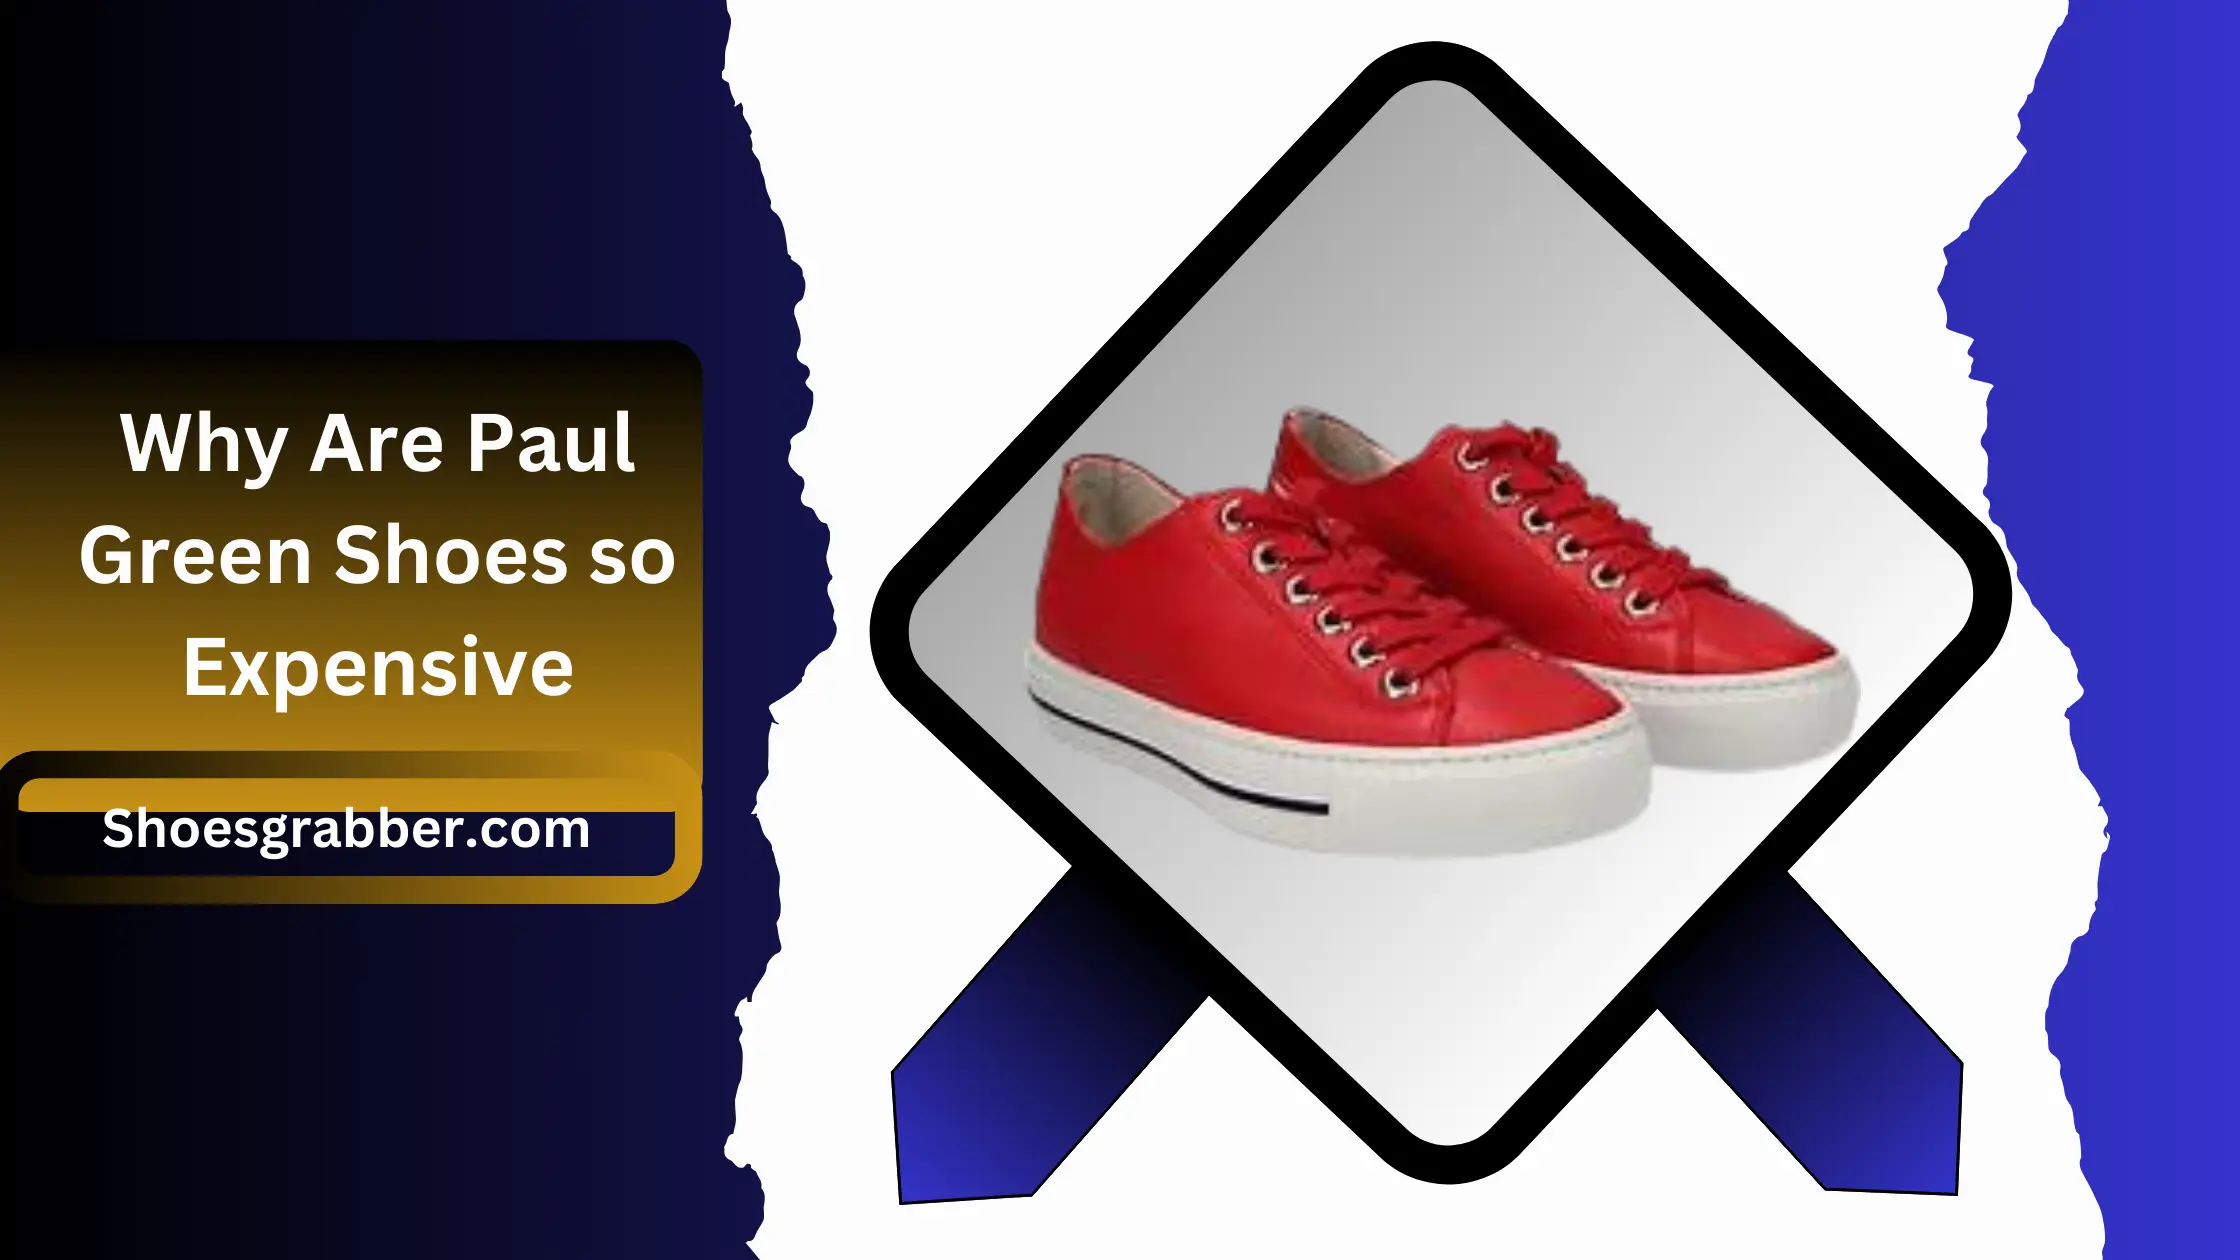 Why Are Paul Green Shoes So Expensive - A Closer Look